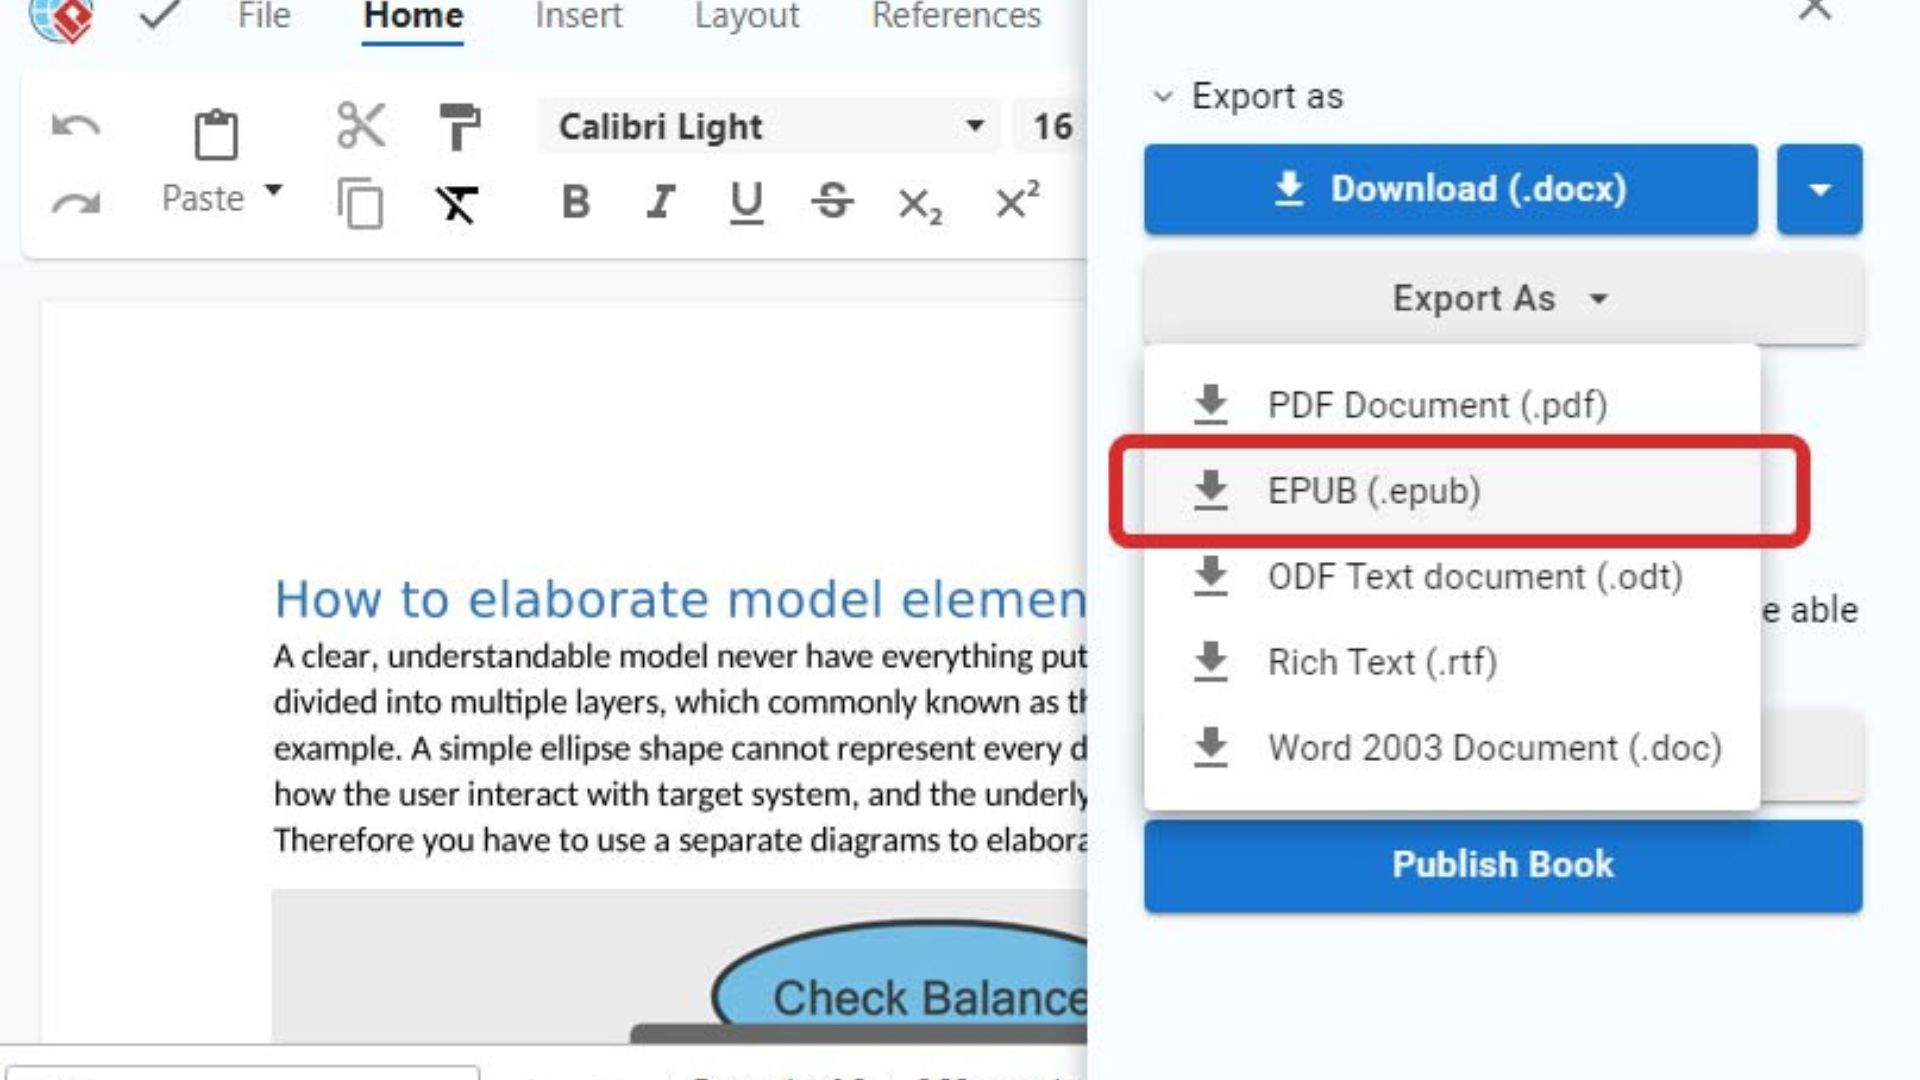 EPUB Files from Microsoft Word Documents